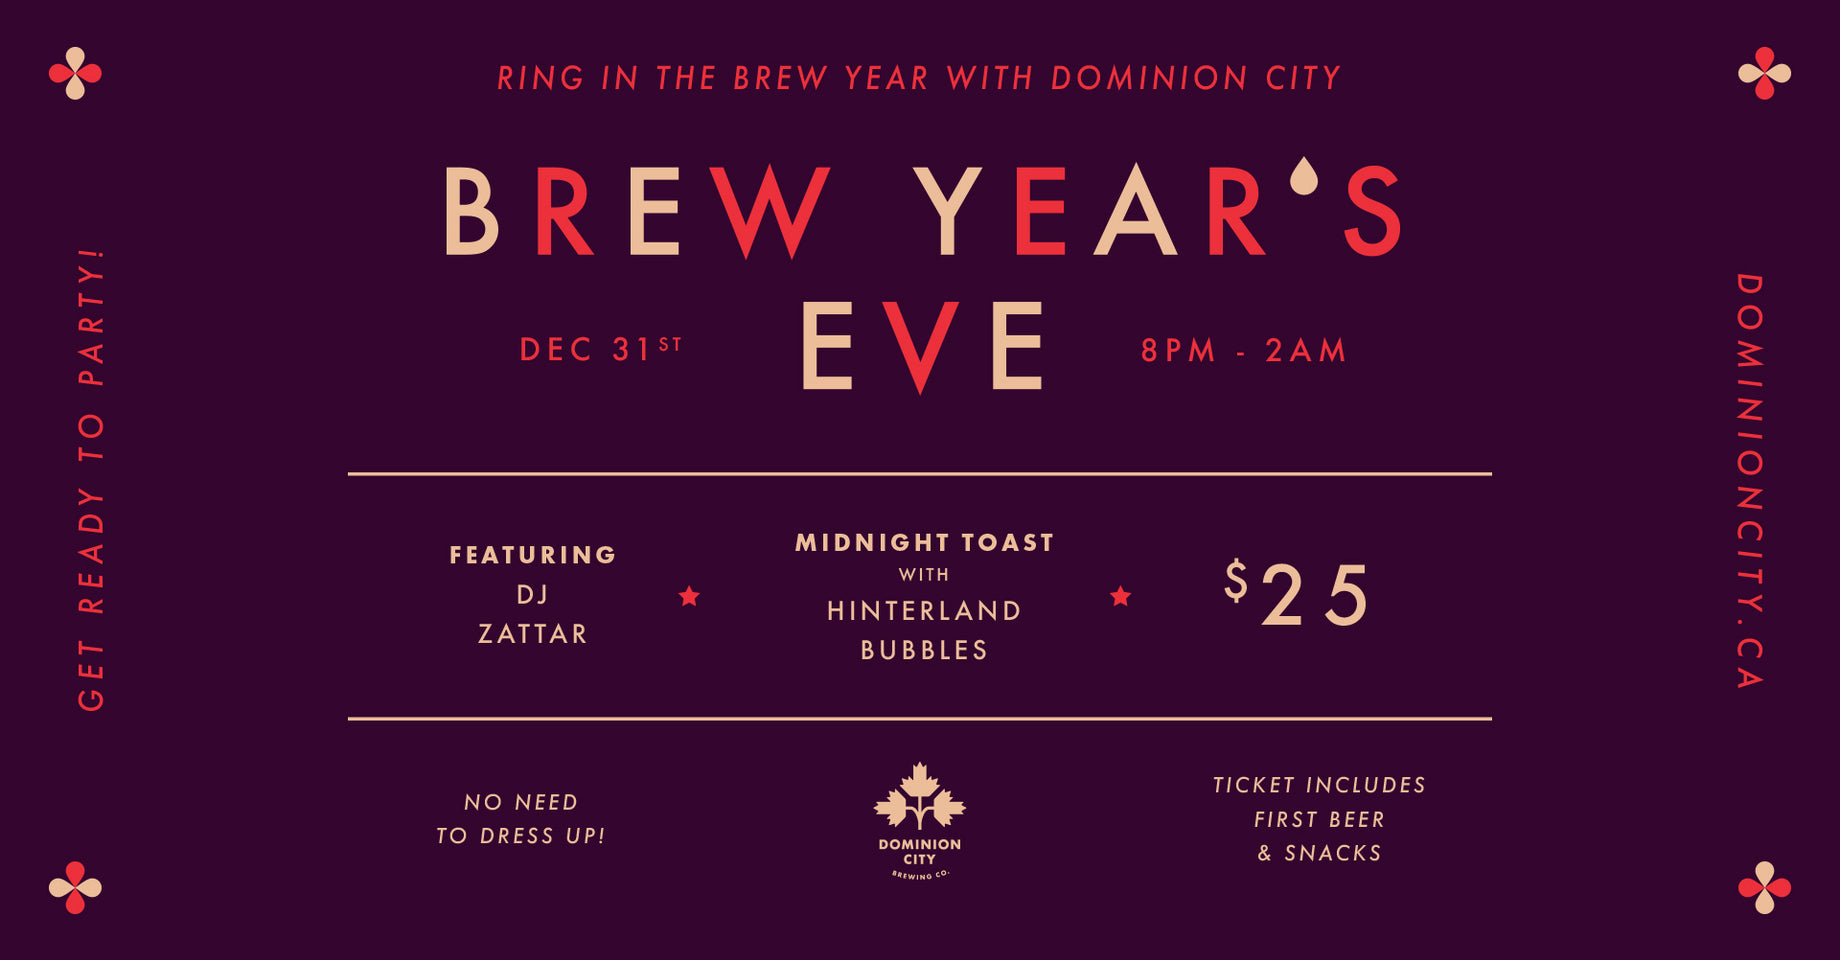 Ring in the brew year with us!